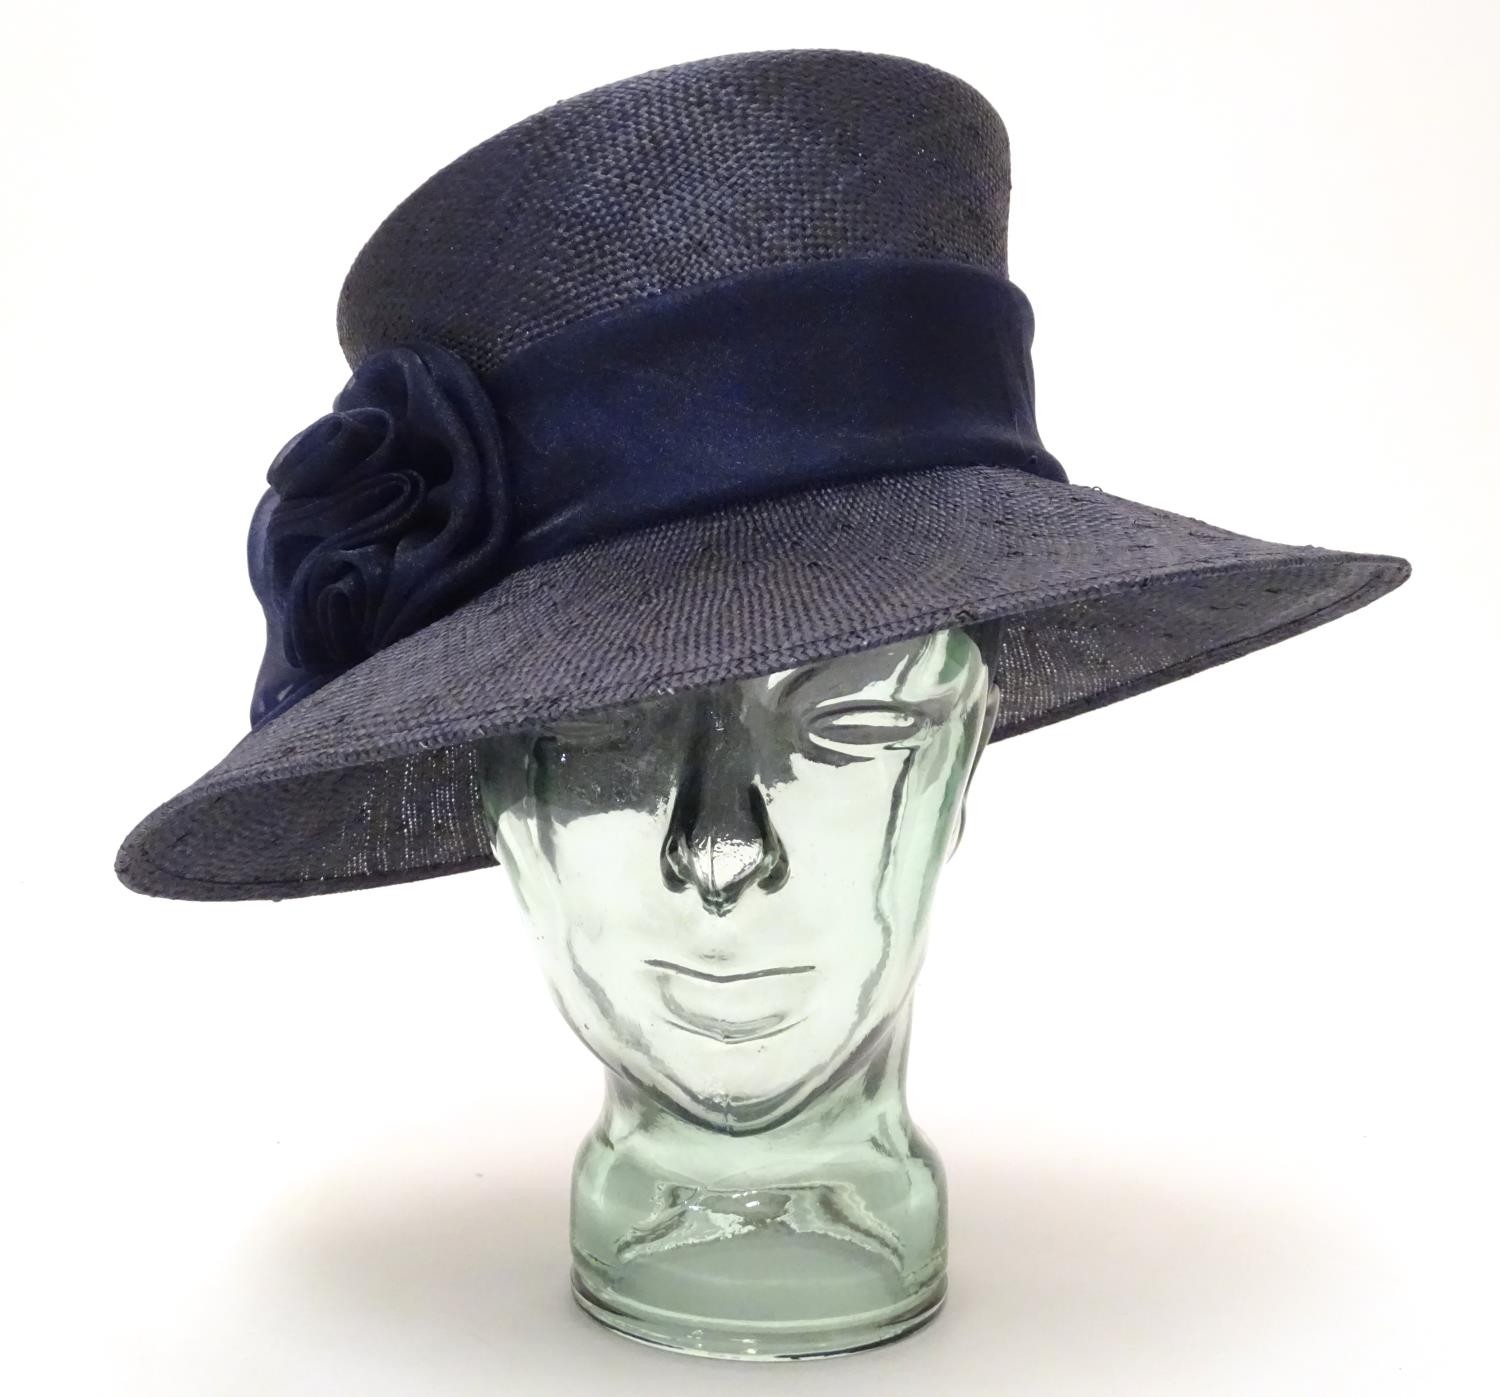 Vintage fashion and clothing: A ladies navy hat Please Note - we do not make reference to the